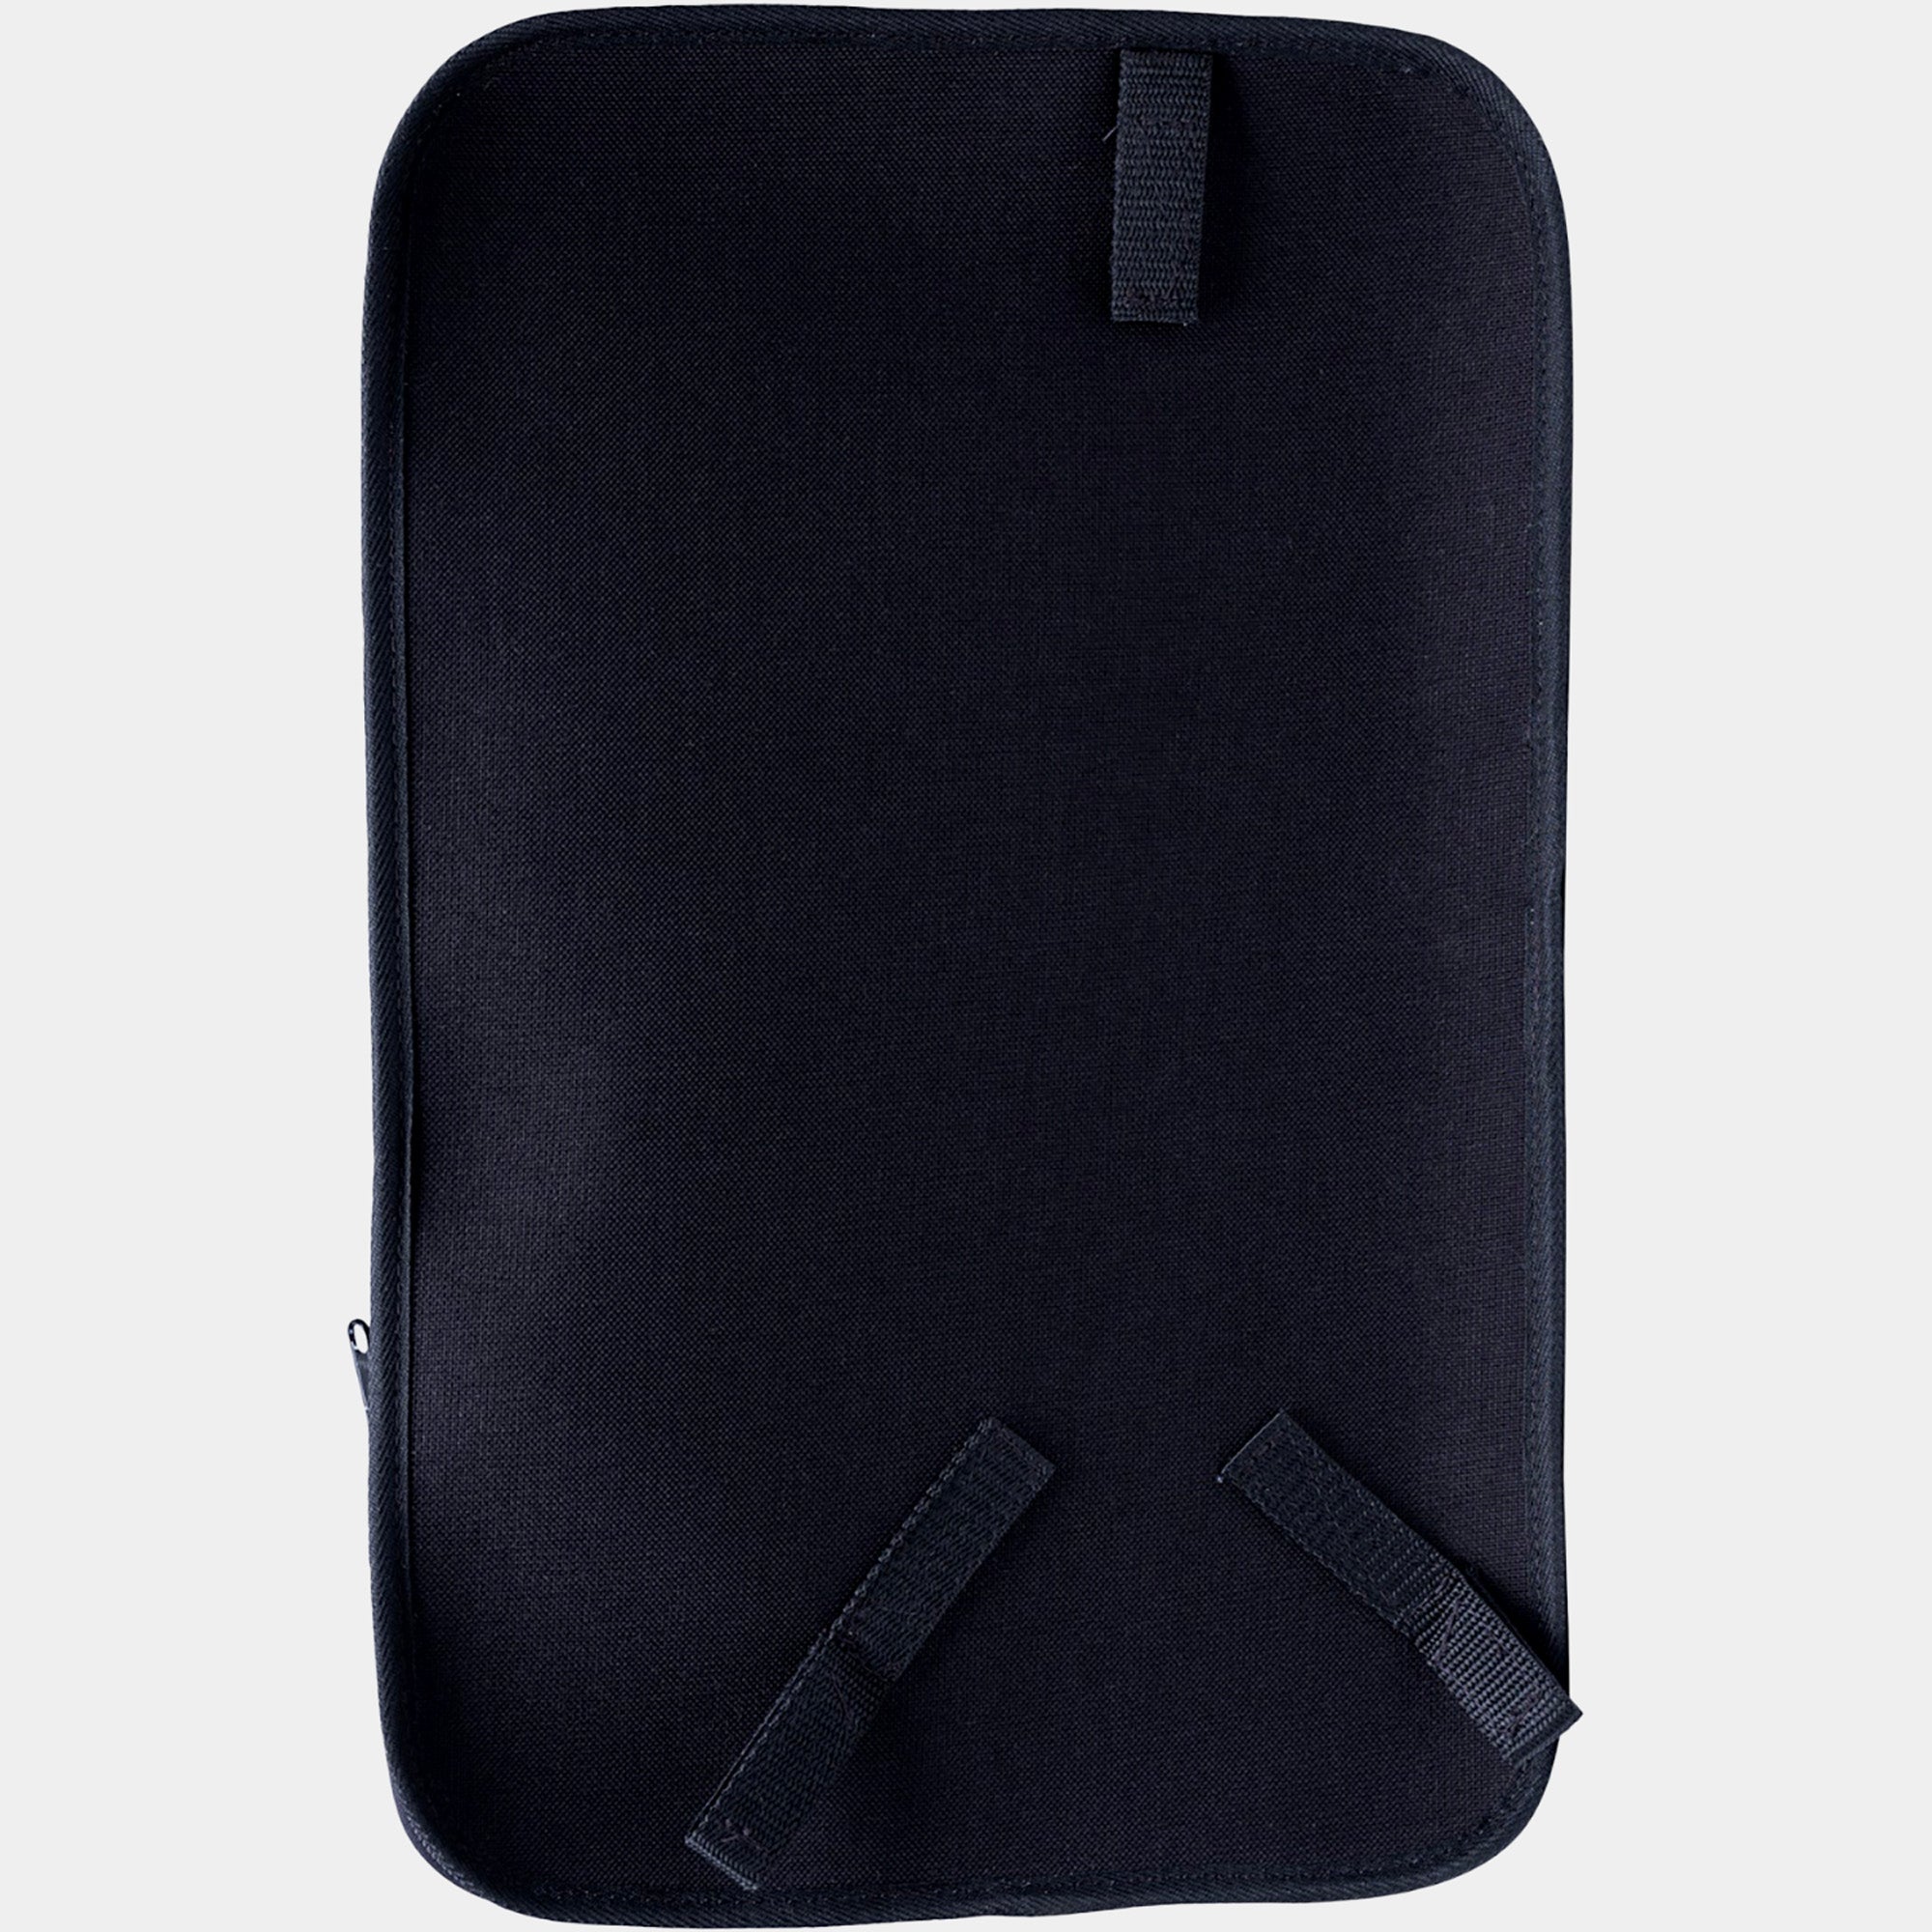 Back Cushion for Hightech Violin & Viola Cases